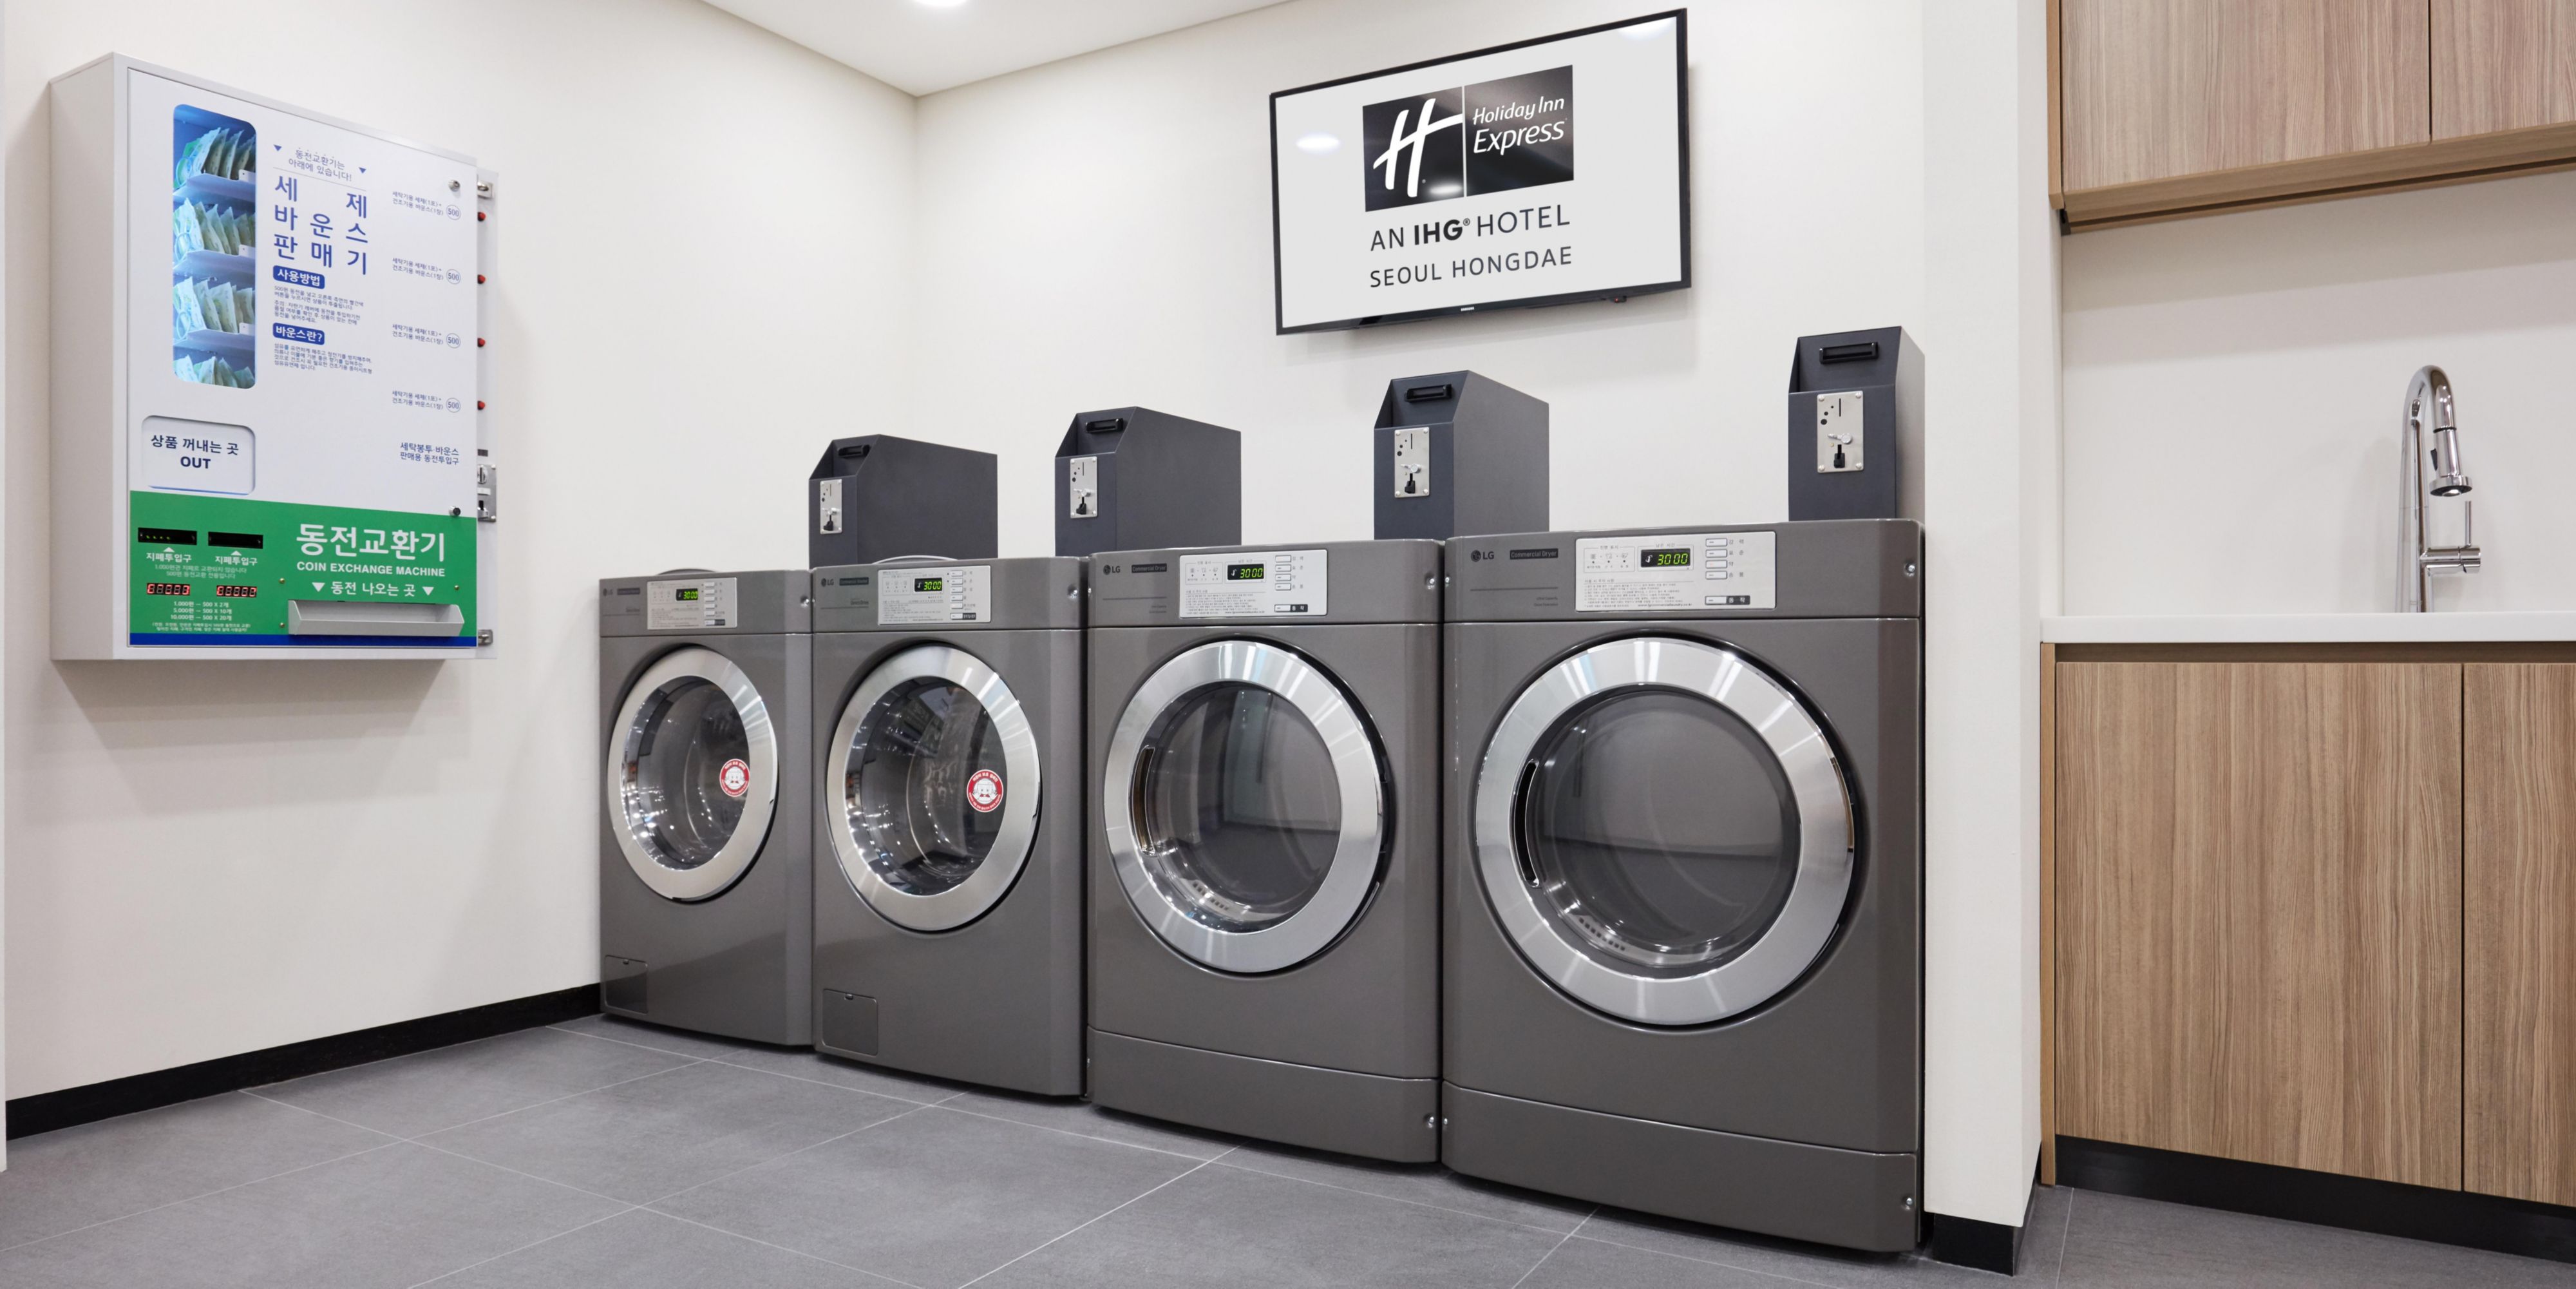 The hotel offers a self-service laundry room consisting of a washing machine, drying machine, and ironing stations on the 16th floor.
Stay fresh in our coin-operated self-service coin laundry Room. Operation Hours 6:00 AM to 22:00 PM.